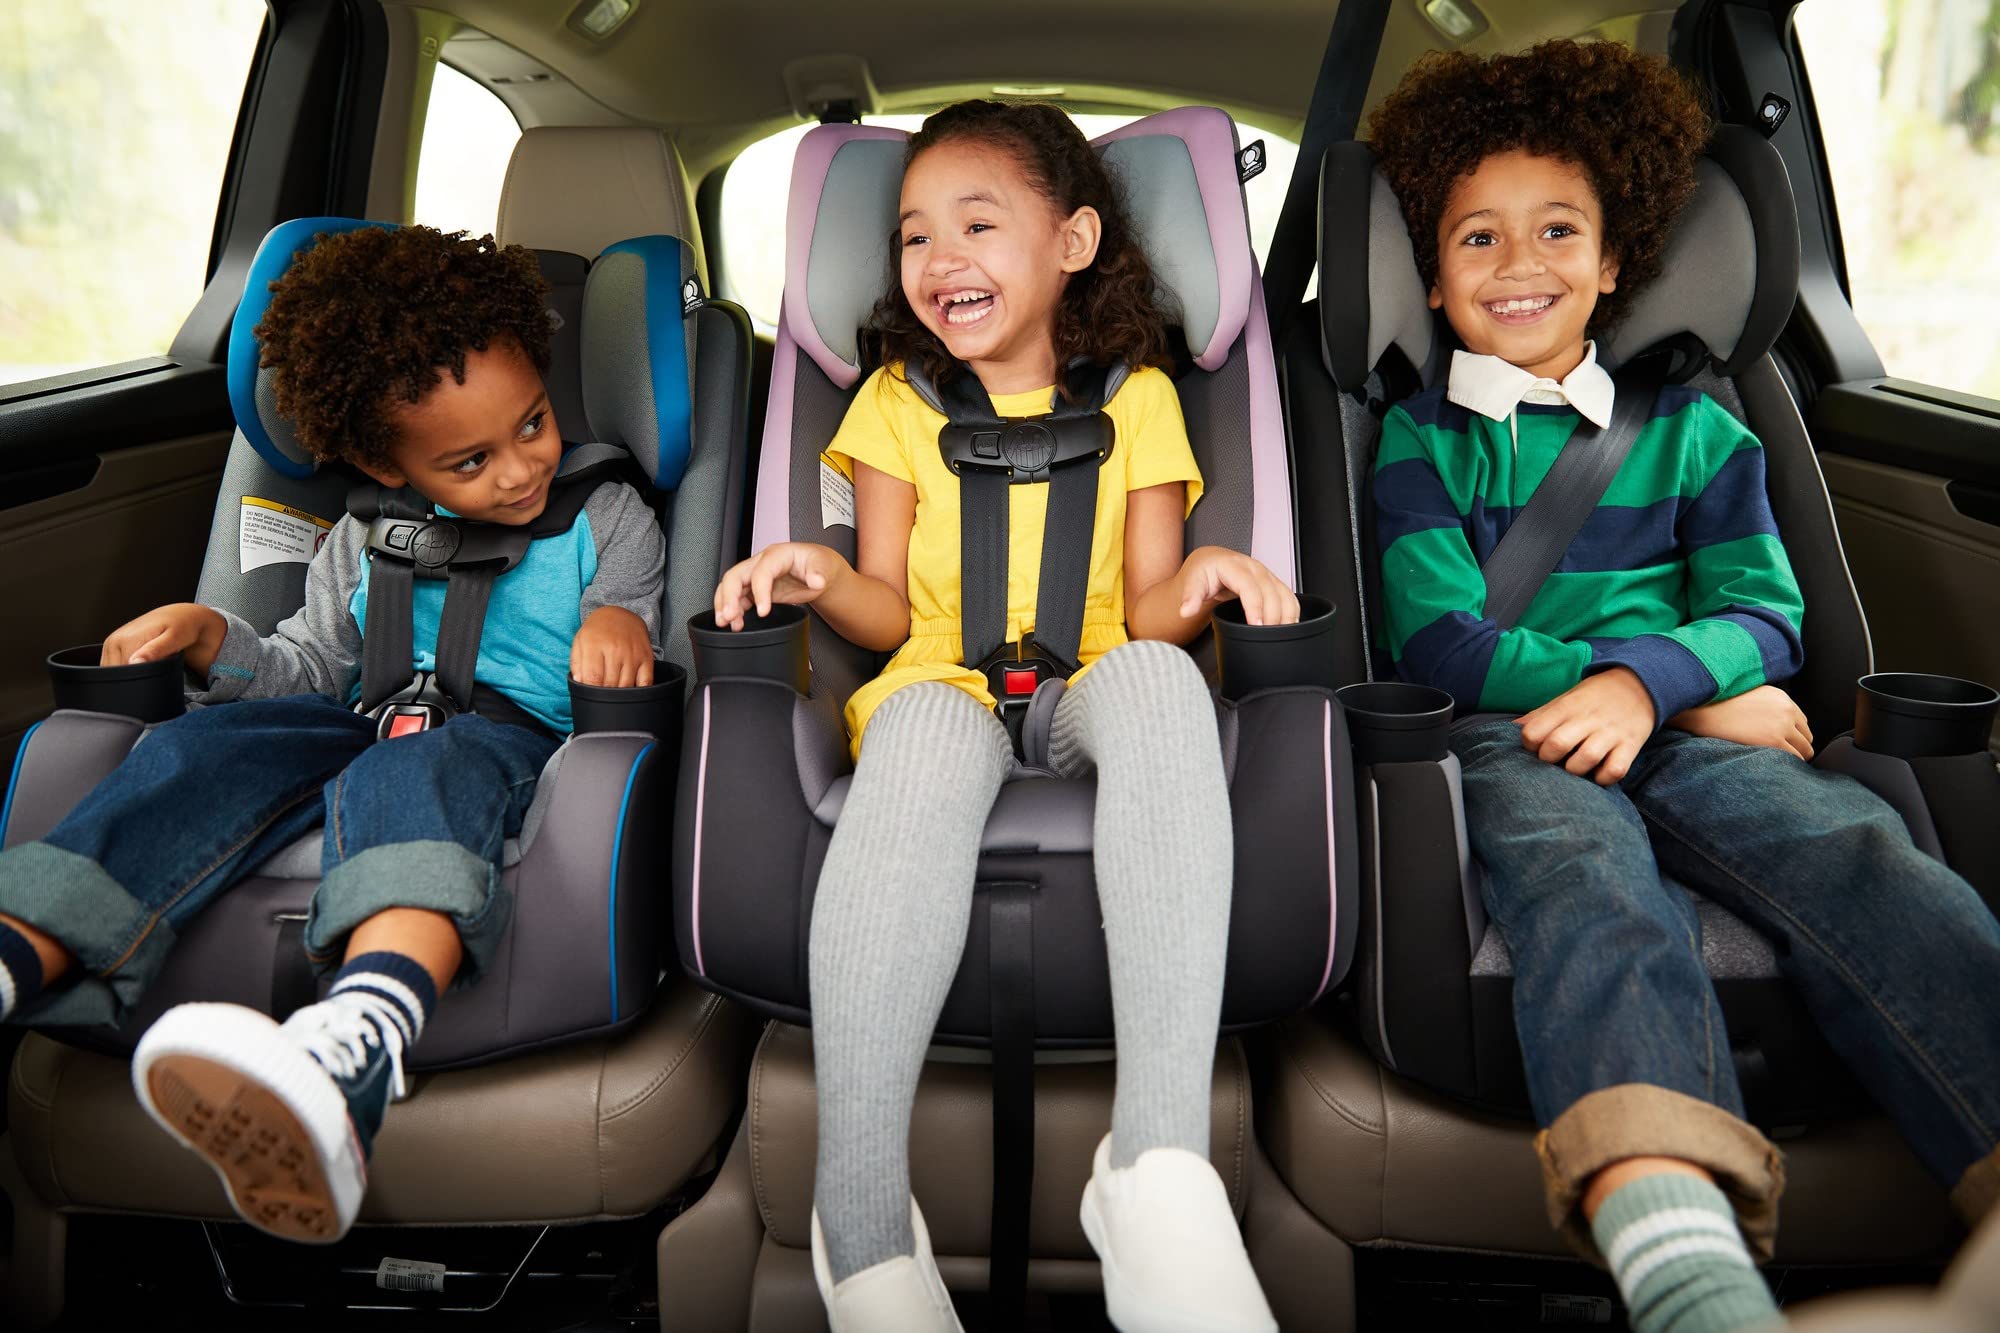 Safety 1st TriMate All-in-One Convertible Car Seat, All-in-one Convertible with Rear-Facing, Forward-Facing, and Belt-Positioning Booster, Dunes Edge